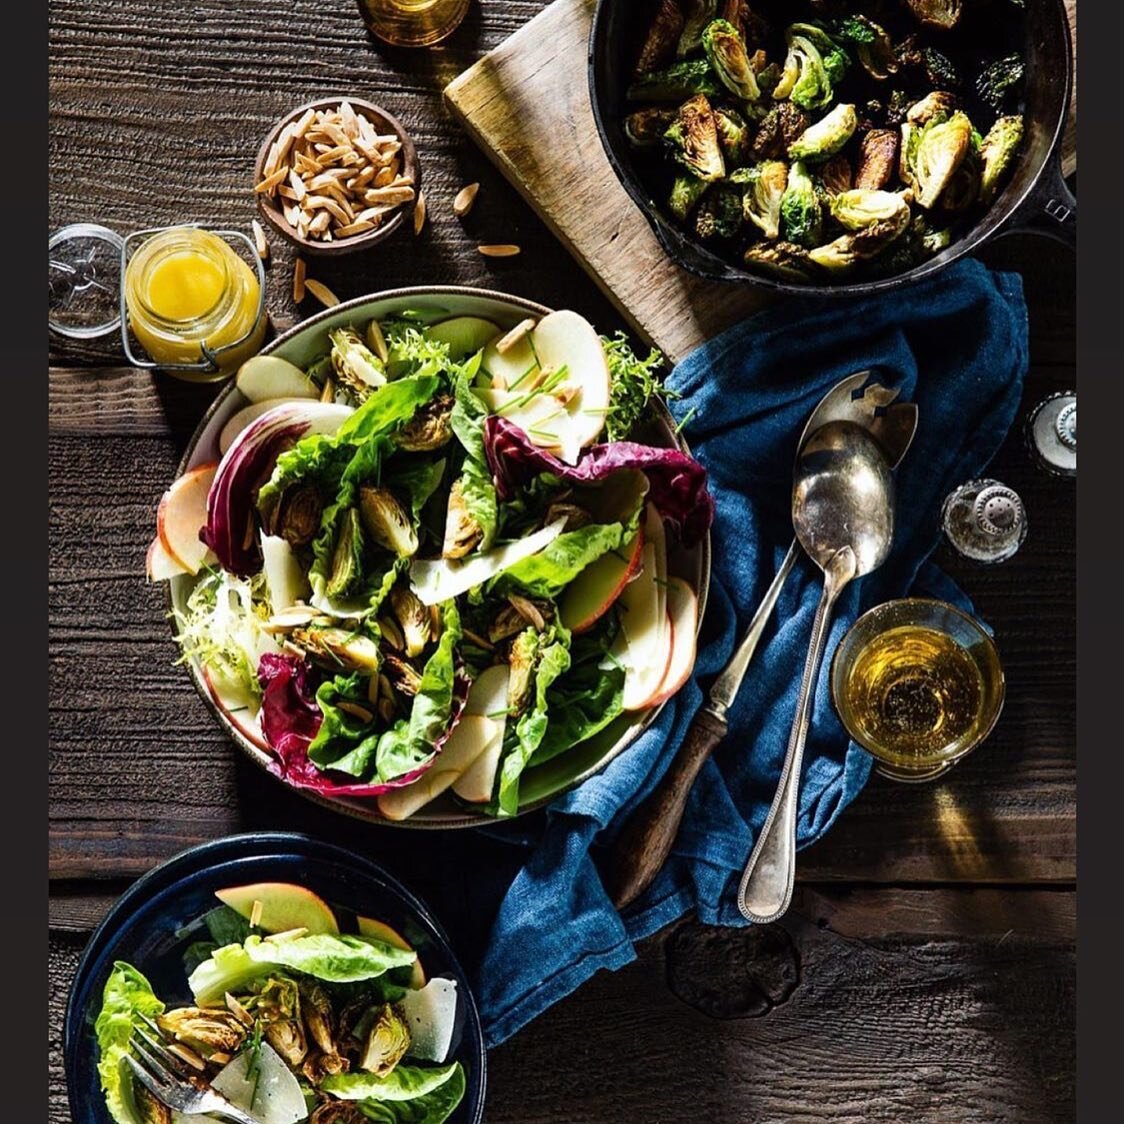 @countrylivingmag The most beautiful salad by @fivemarysfarms . #foodphotography by @erinkunkel Props by @goldenfieldsfloristry. #foodstyling